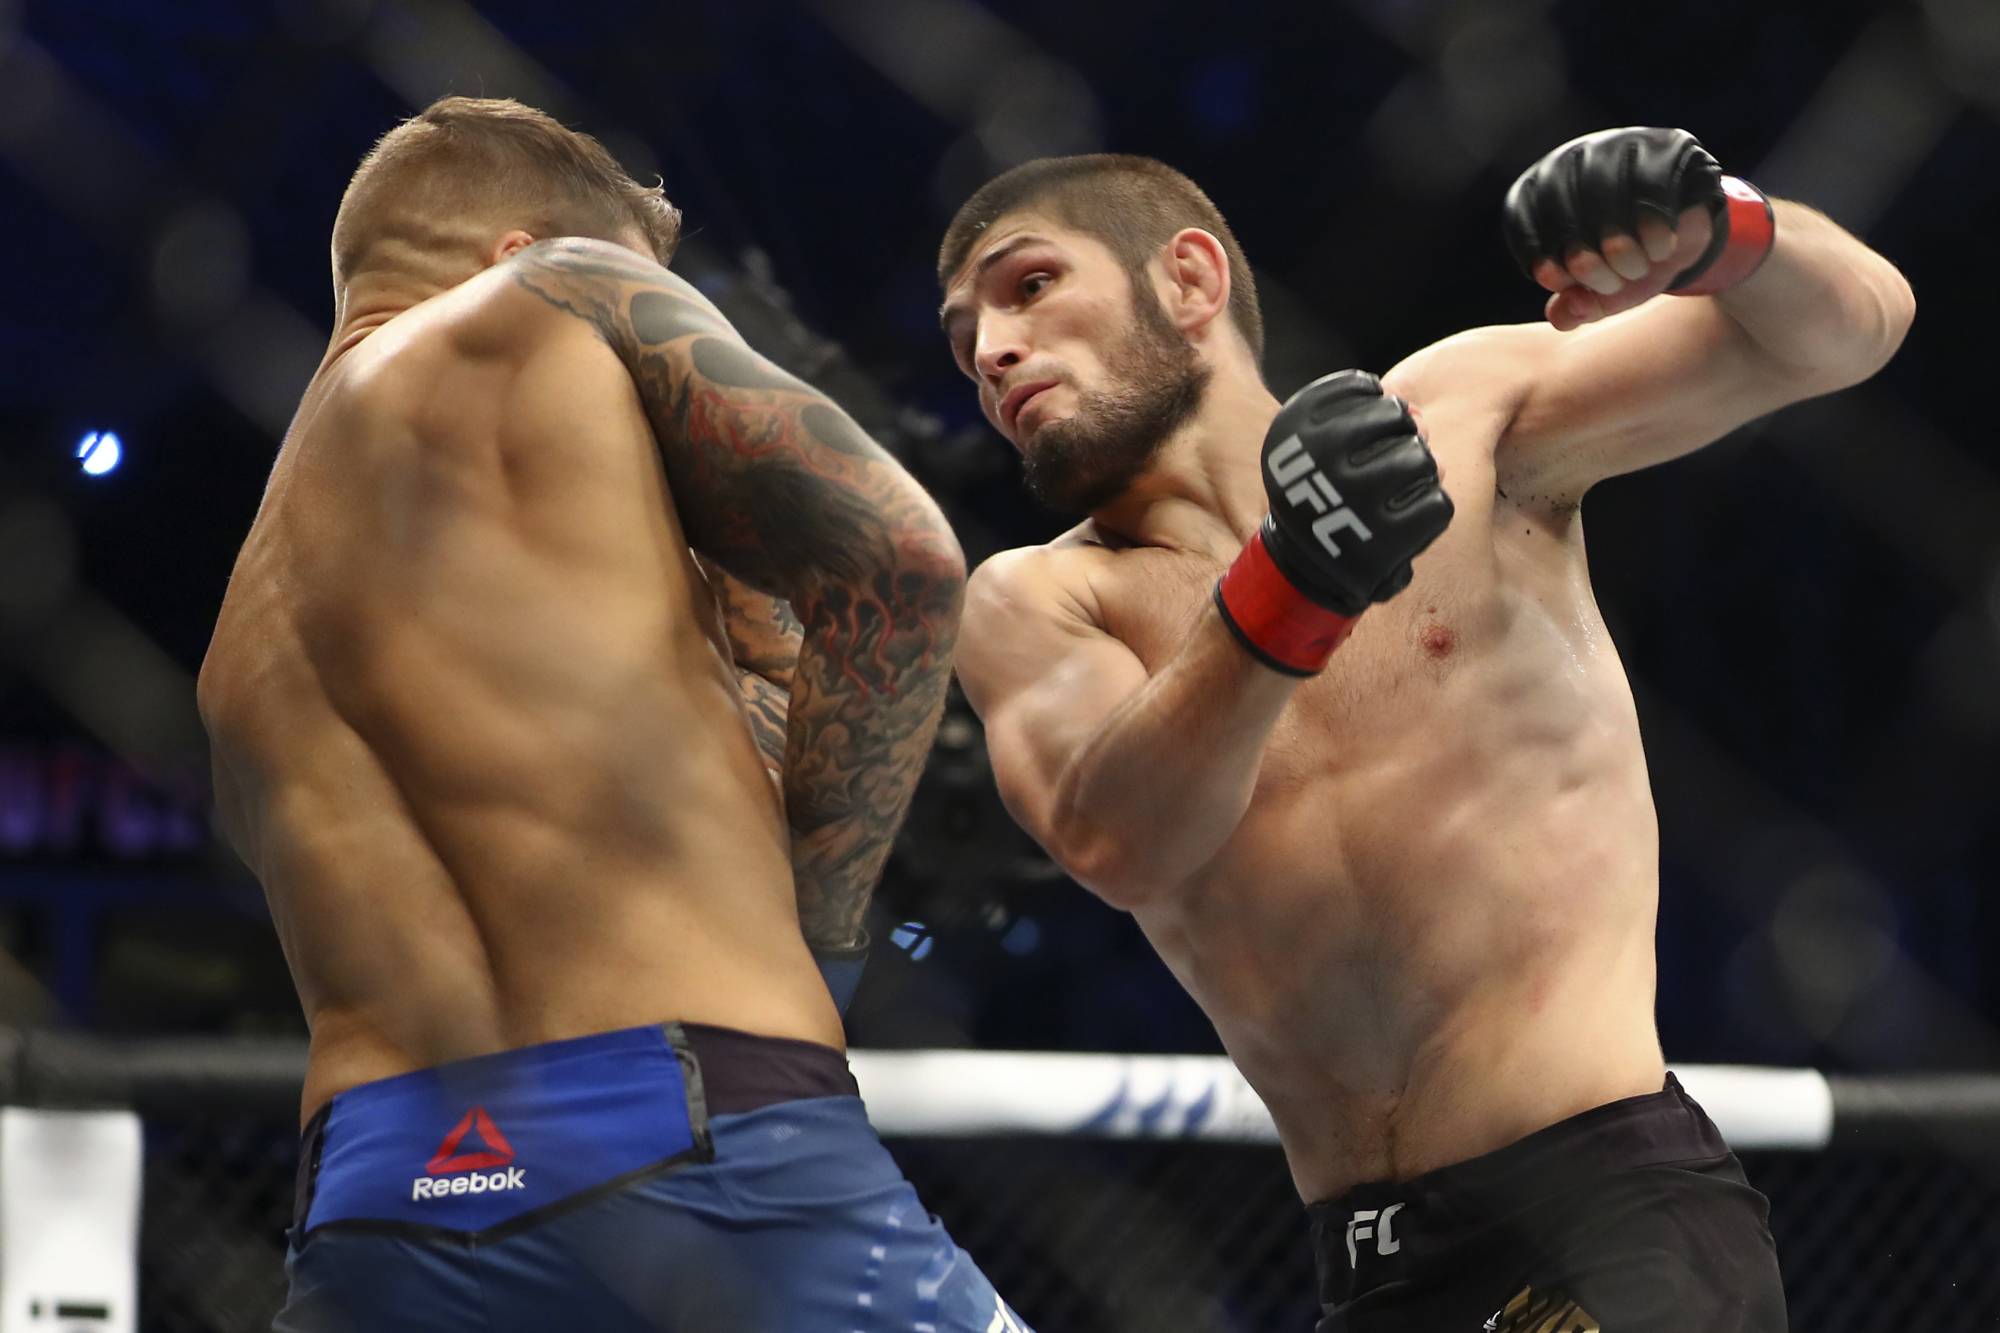 Victorious and undefeated, Khabib Nurmagomedov retires from UFC